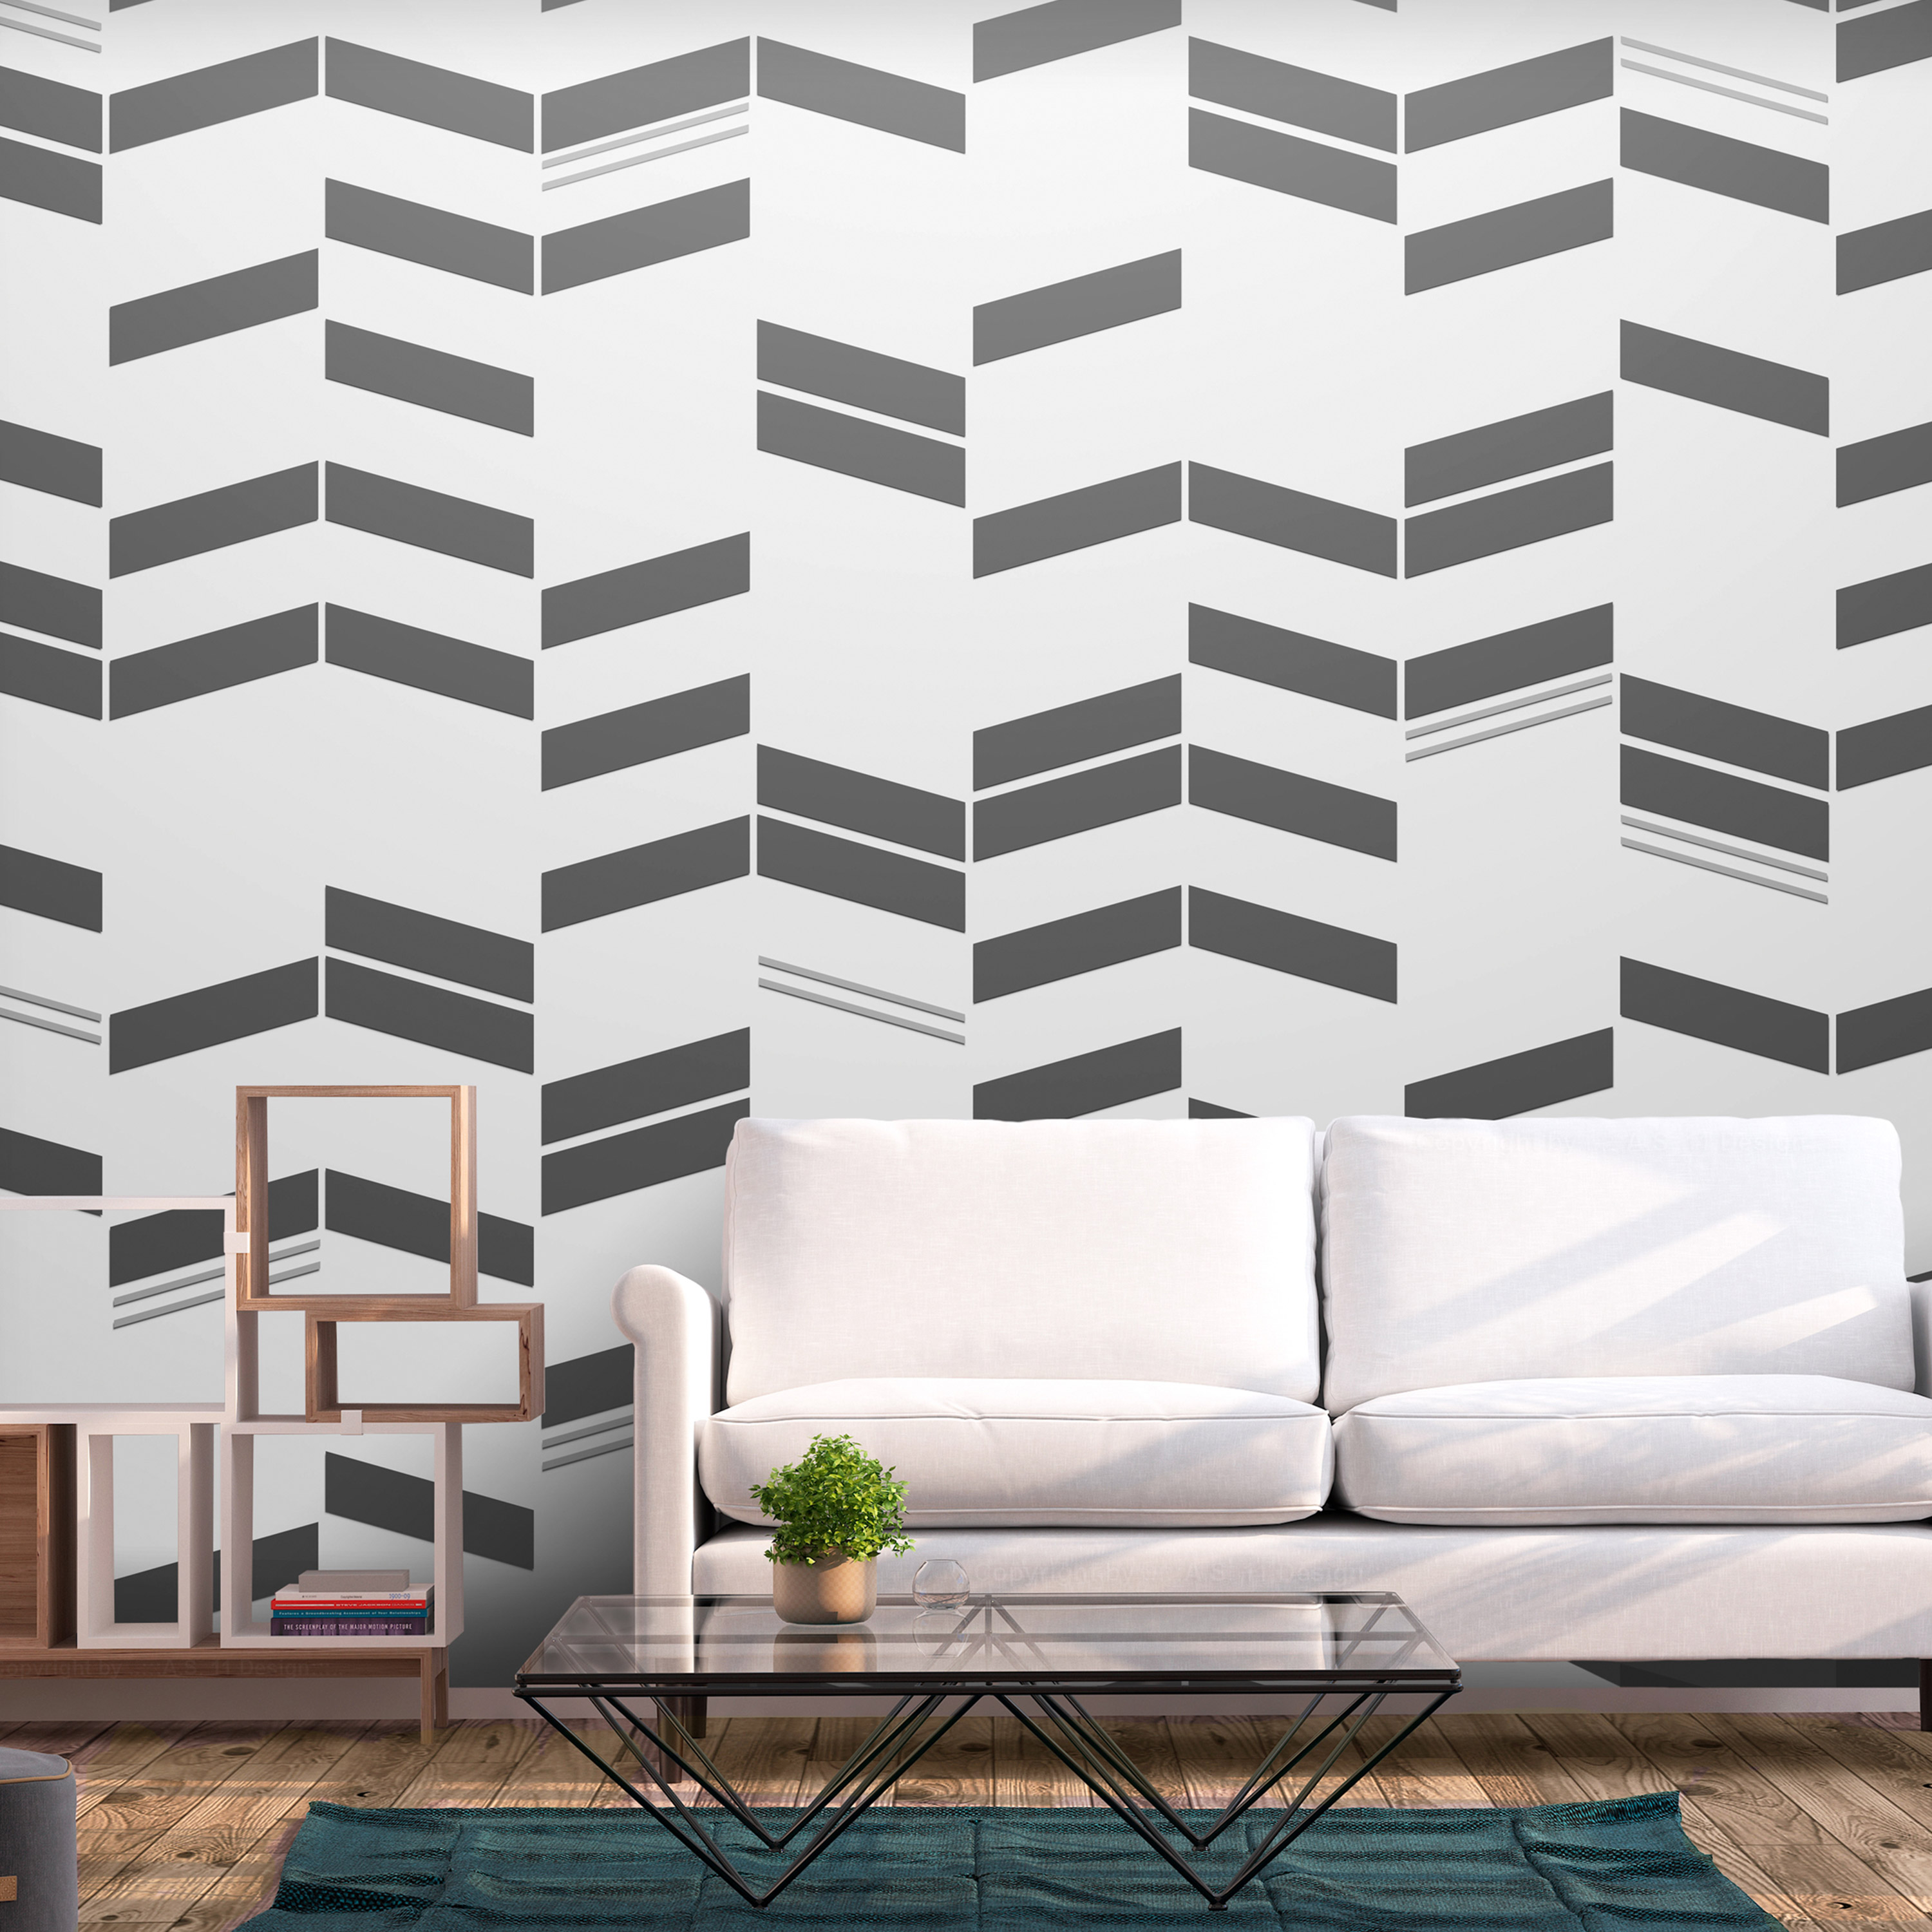 Self-adhesive Wallpaper - Simple Structures - 245x175